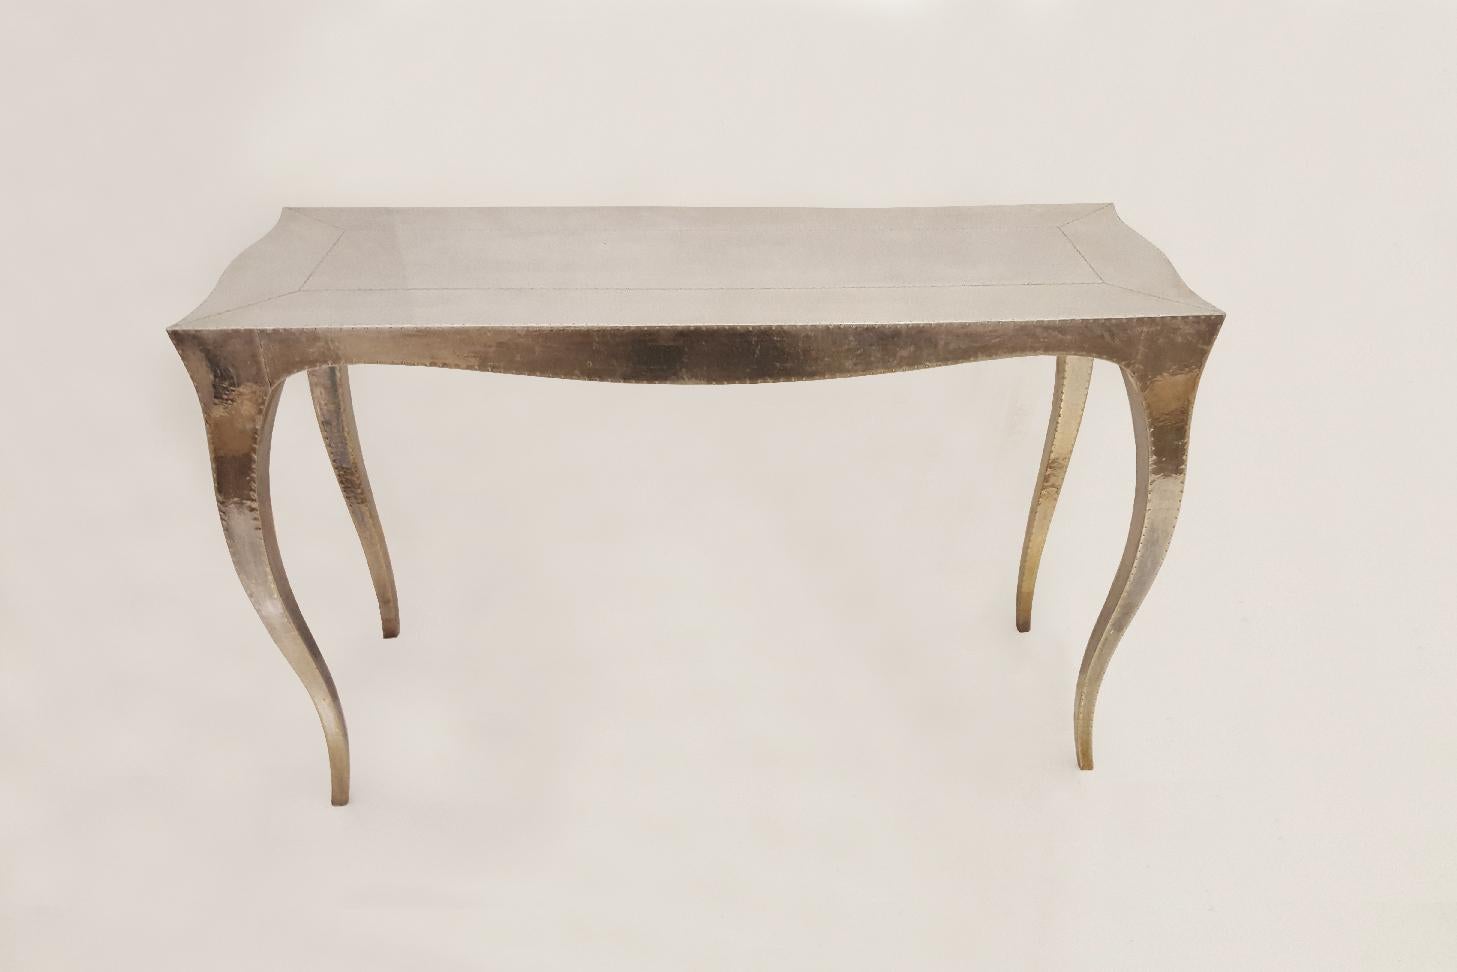 Louise Console Art Nouveau Tray Tables Mid. Hammered Copper by Paul Mathieu  For Sale 5